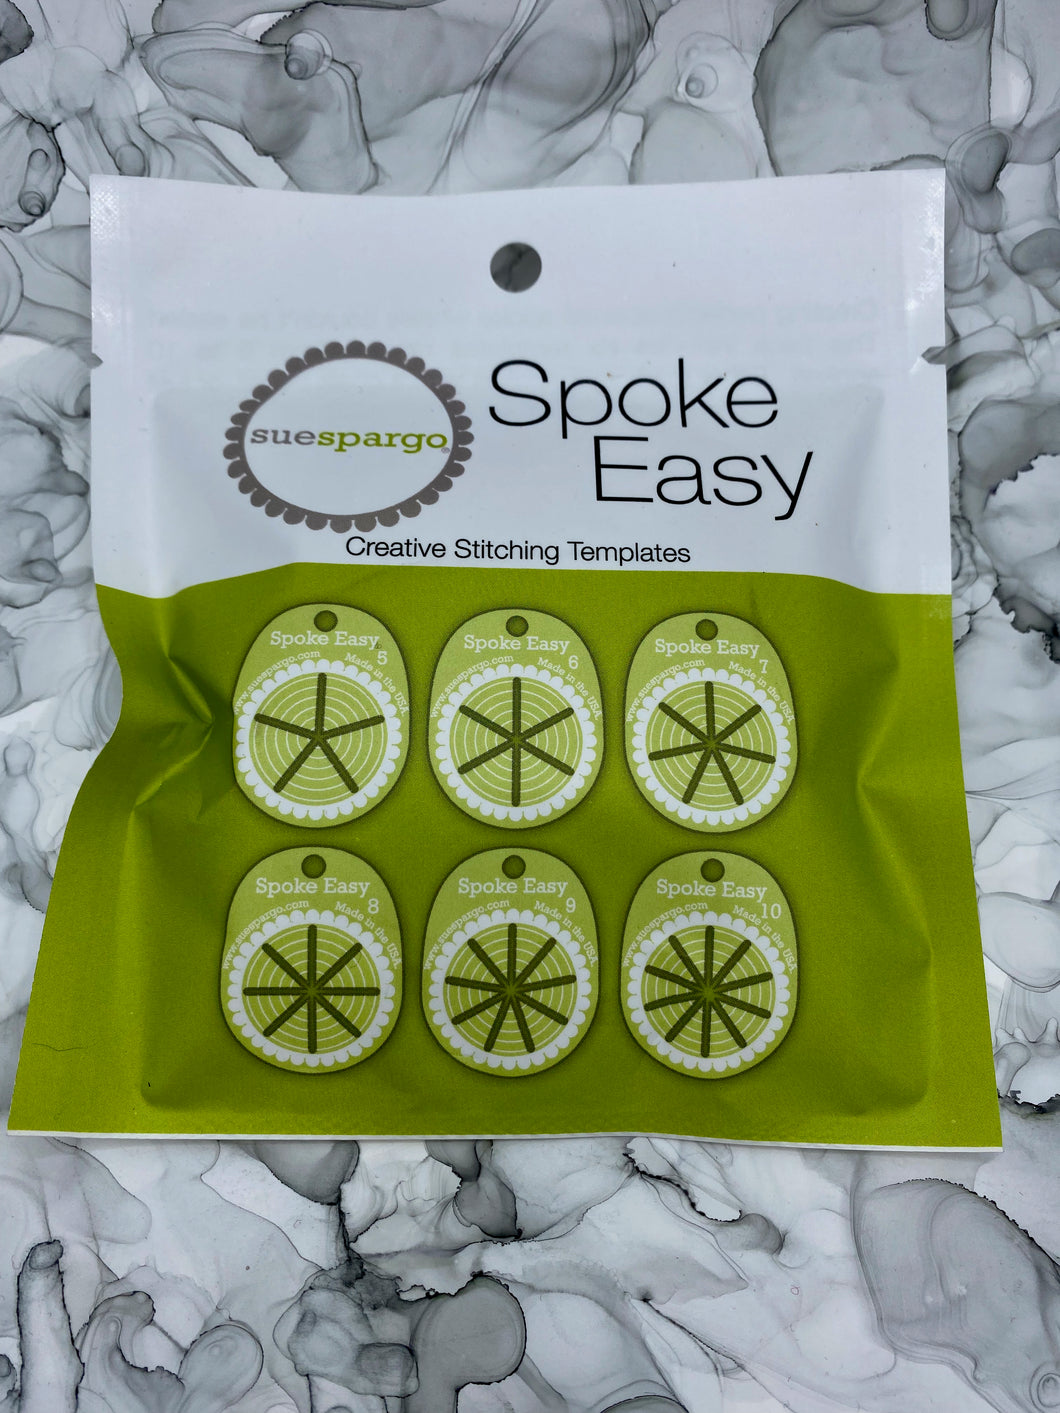 Spoke Easy Stitching Template by Sue Spargo